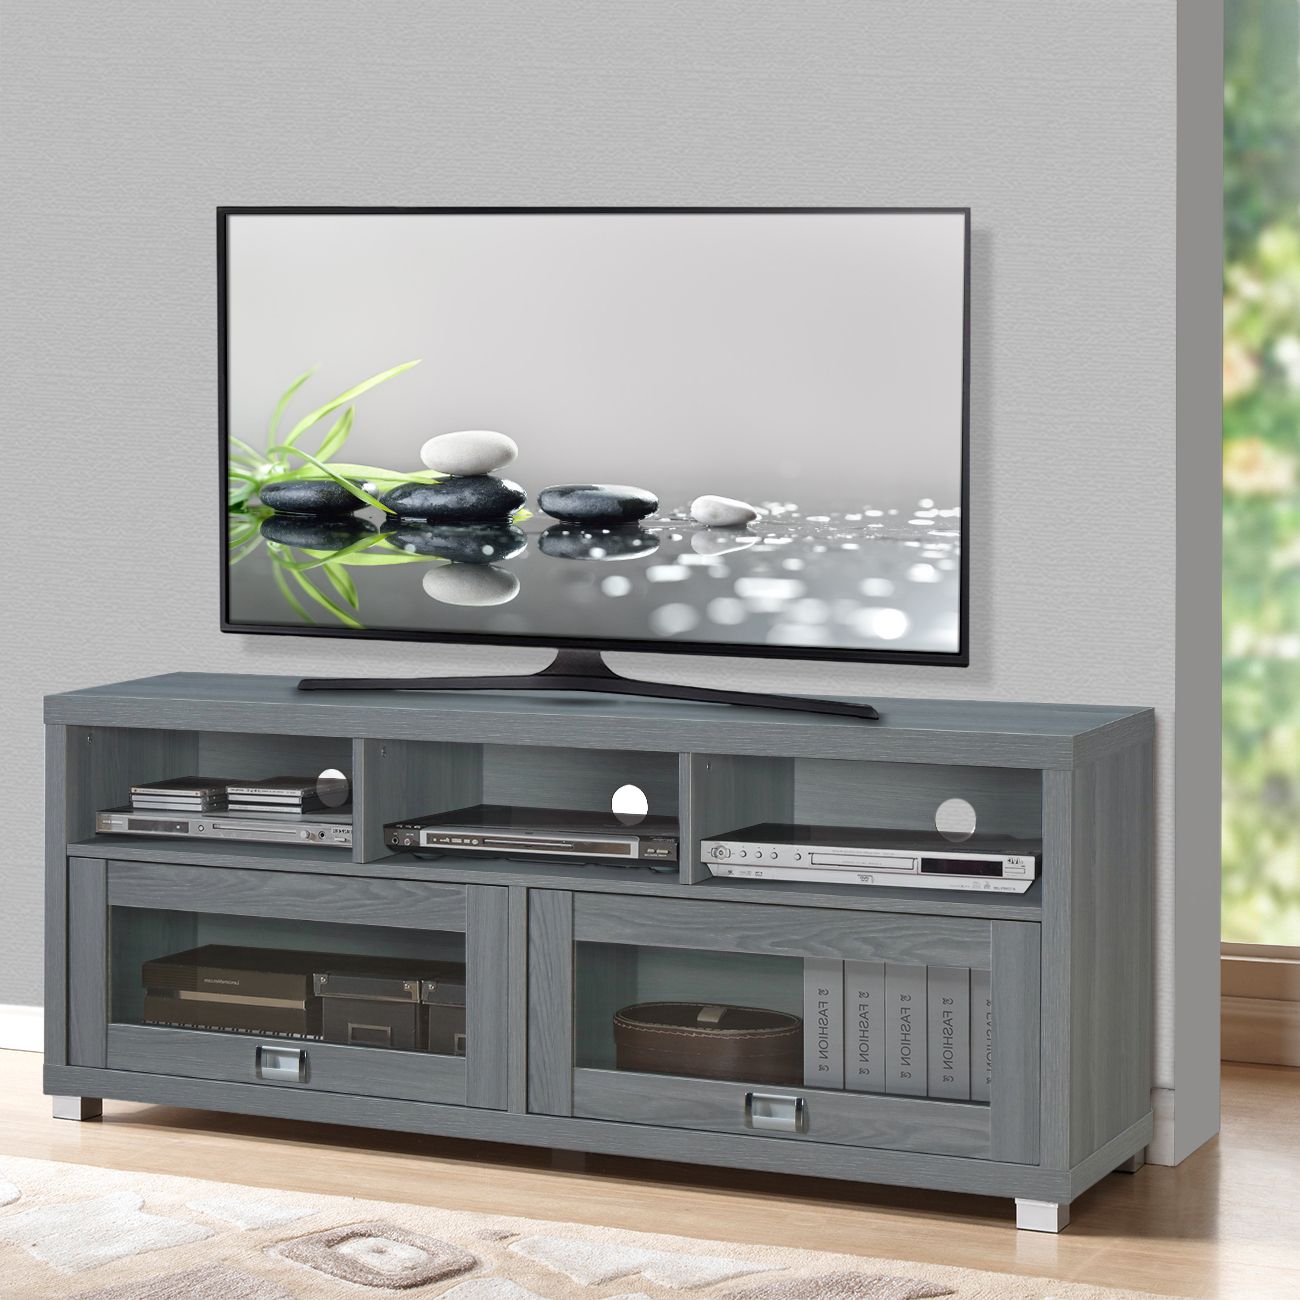 Flat Screen Tv Stand Up To 75 Inch 50 55 60 65 70 55in Throughout Allegra Tv Stands For Tvs Up To 50" (Gallery 19 of 20)